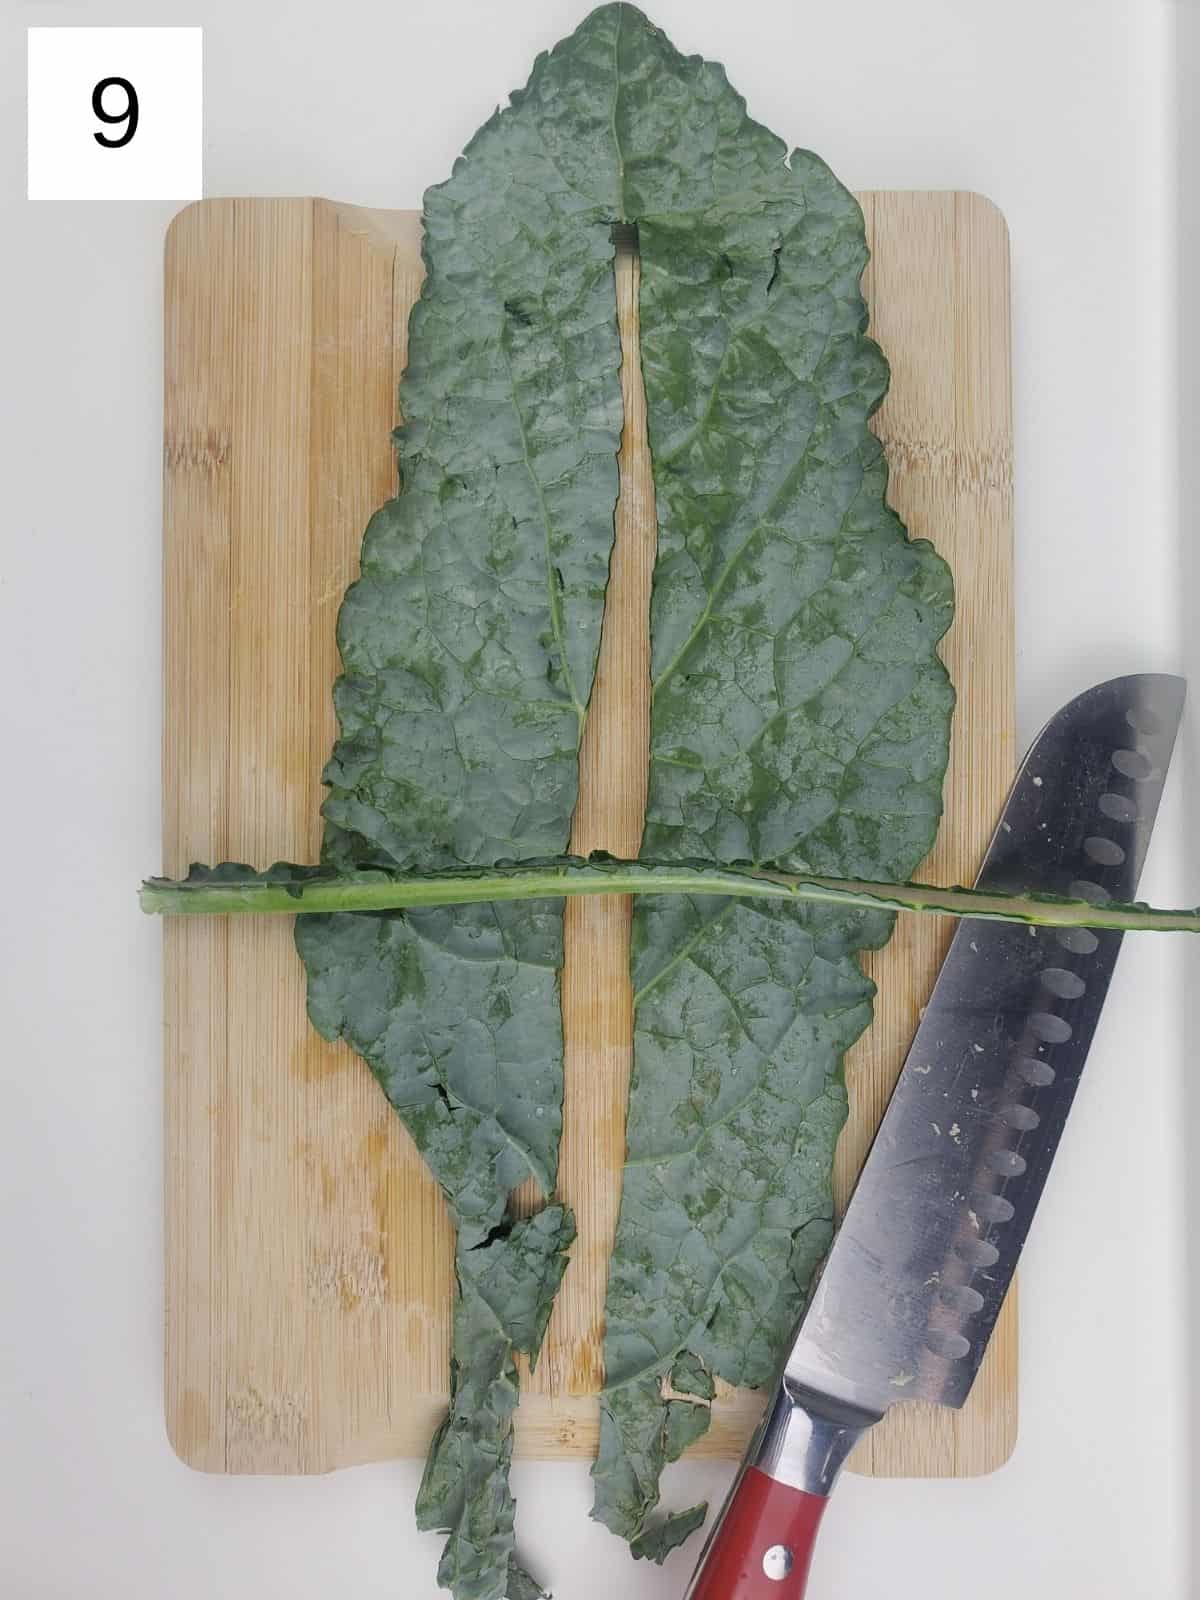 kale leaf with spine removed, on a wooden cutting board.